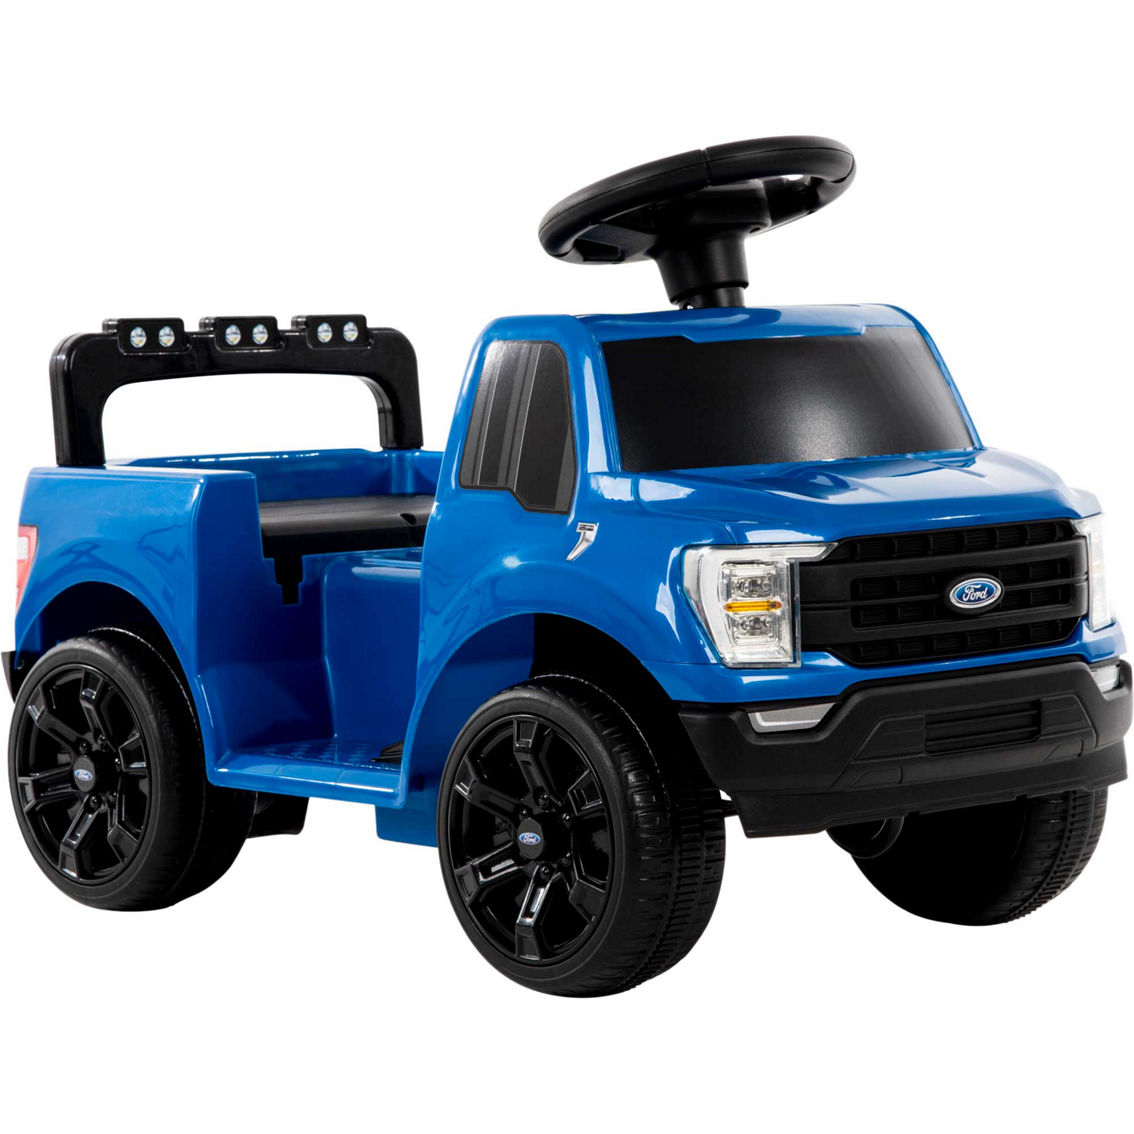 Huffy 6V Ford F150 Truck Battery Ride On Toy - Image 2 of 9